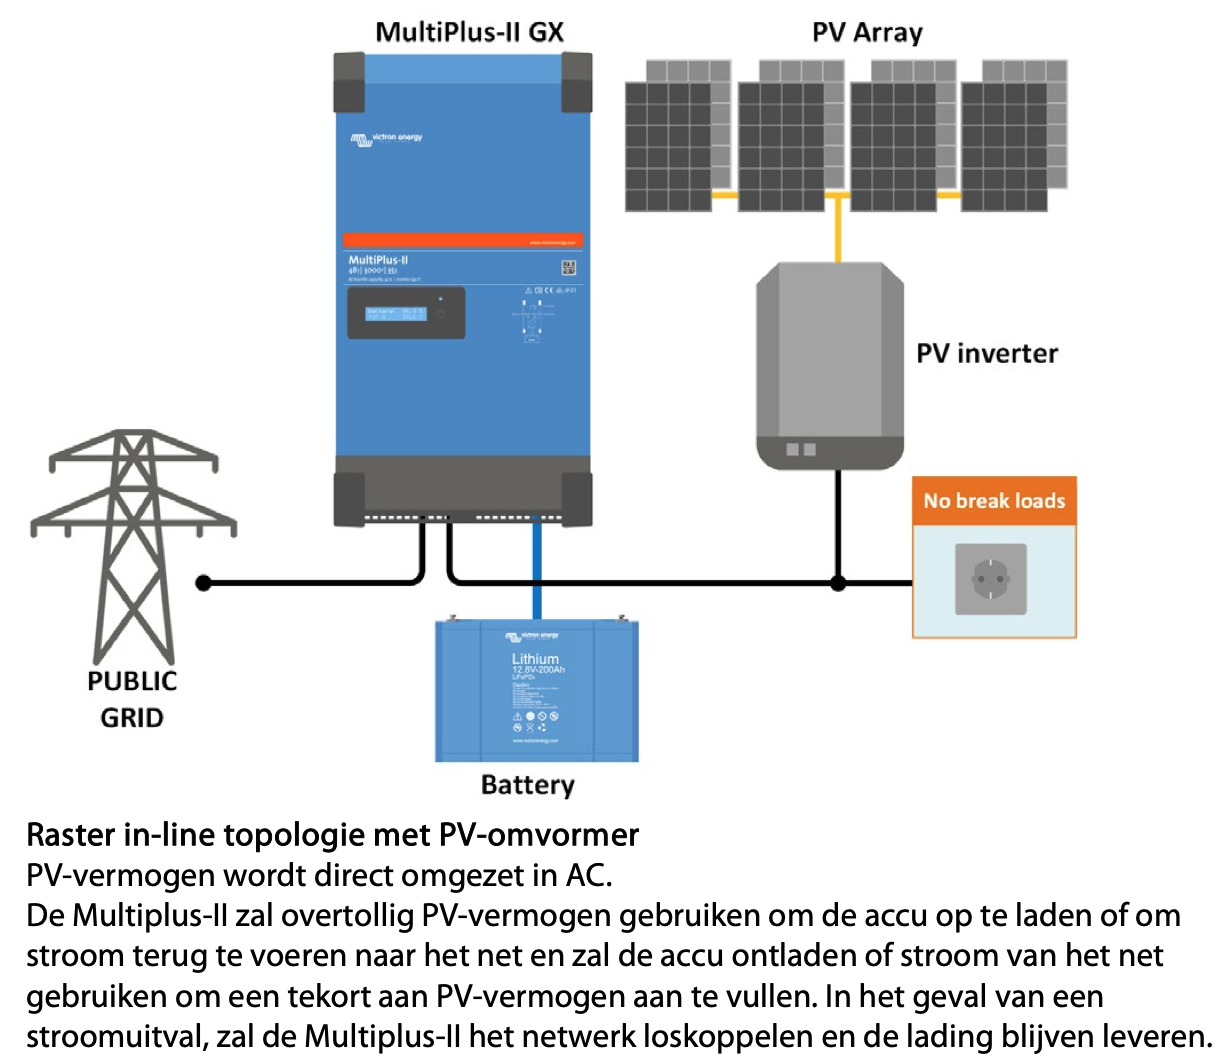 Streng Sloppenwijk Belachelijk Can multiplus II optimize self consumption of PV AC generated energy in a  3-phase house - Victron Community